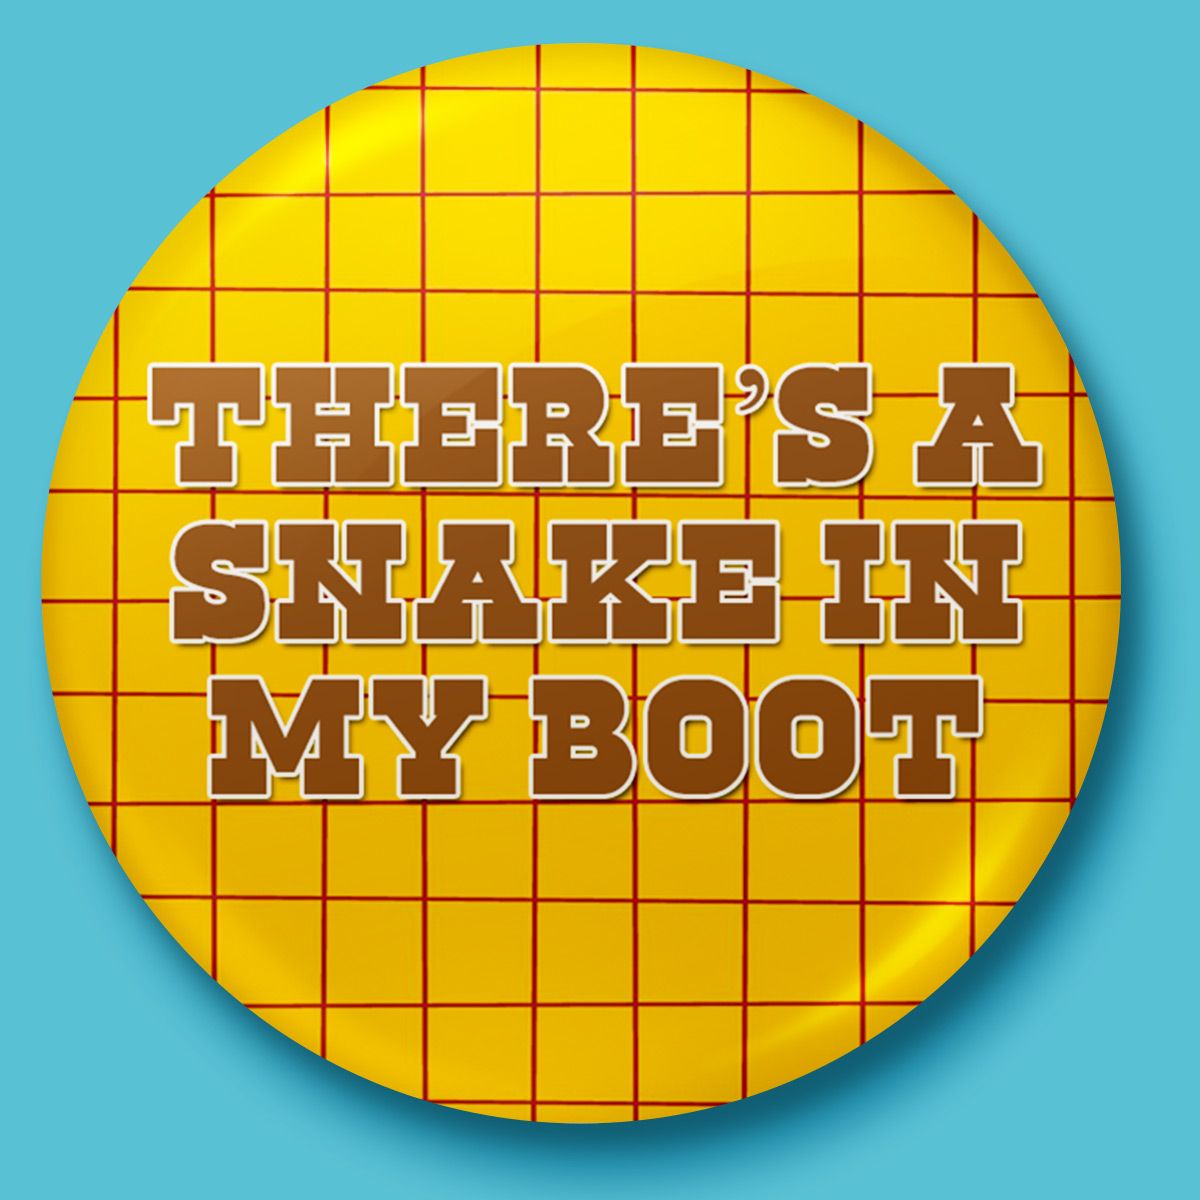 There's a Snake in my Boot Image